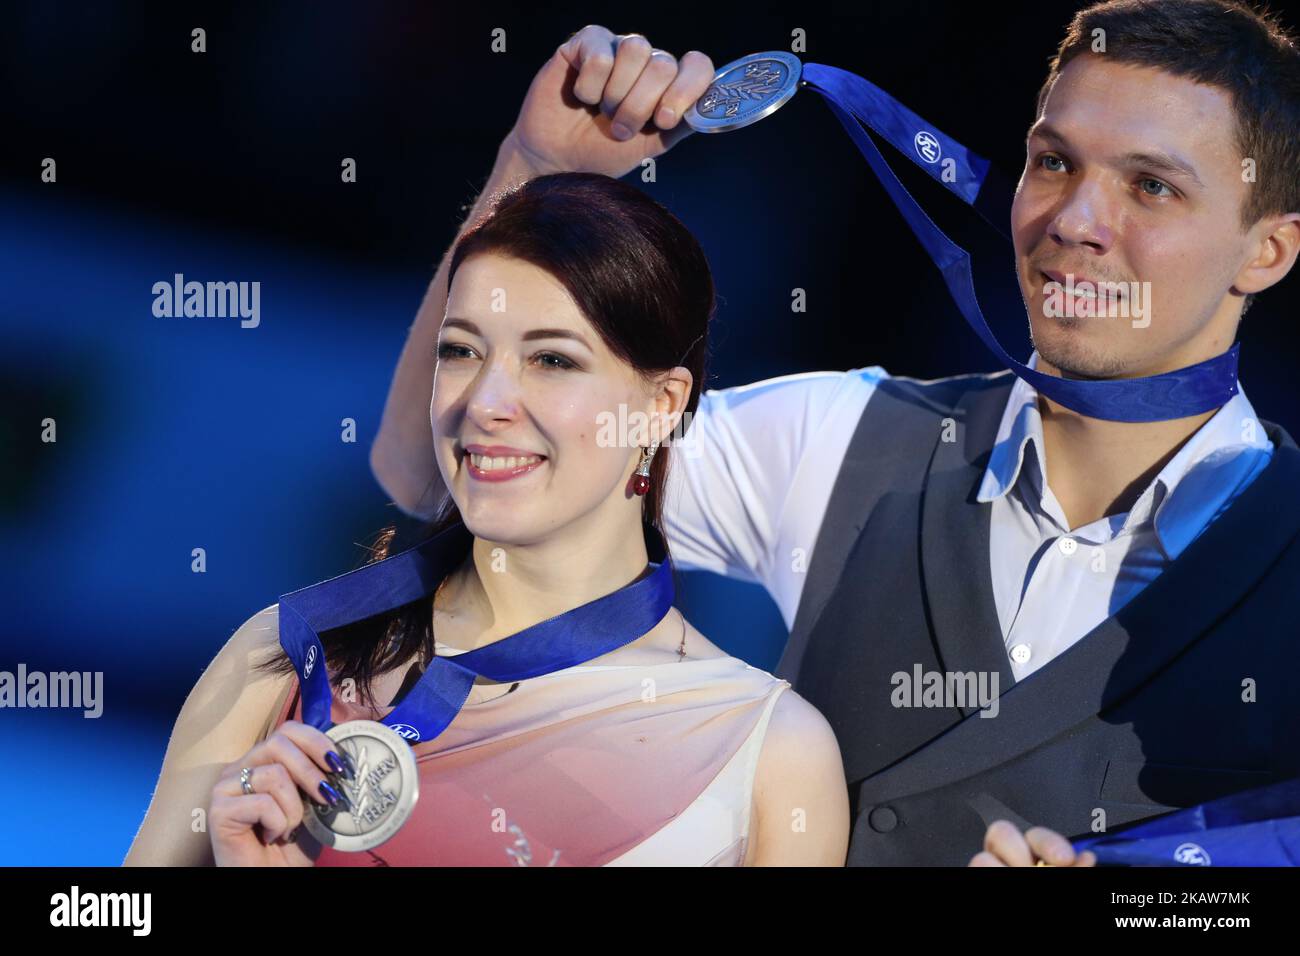 Silver medallists Ekaterina Bobrova and Dmitri Soloviev of Russia pose with their medals after the ice dance free dance at the ISU European Figure Skating Championships in Moscow, on January 20, 2018. (Photo by Igor Russak/NurPhoto) Stock Photo